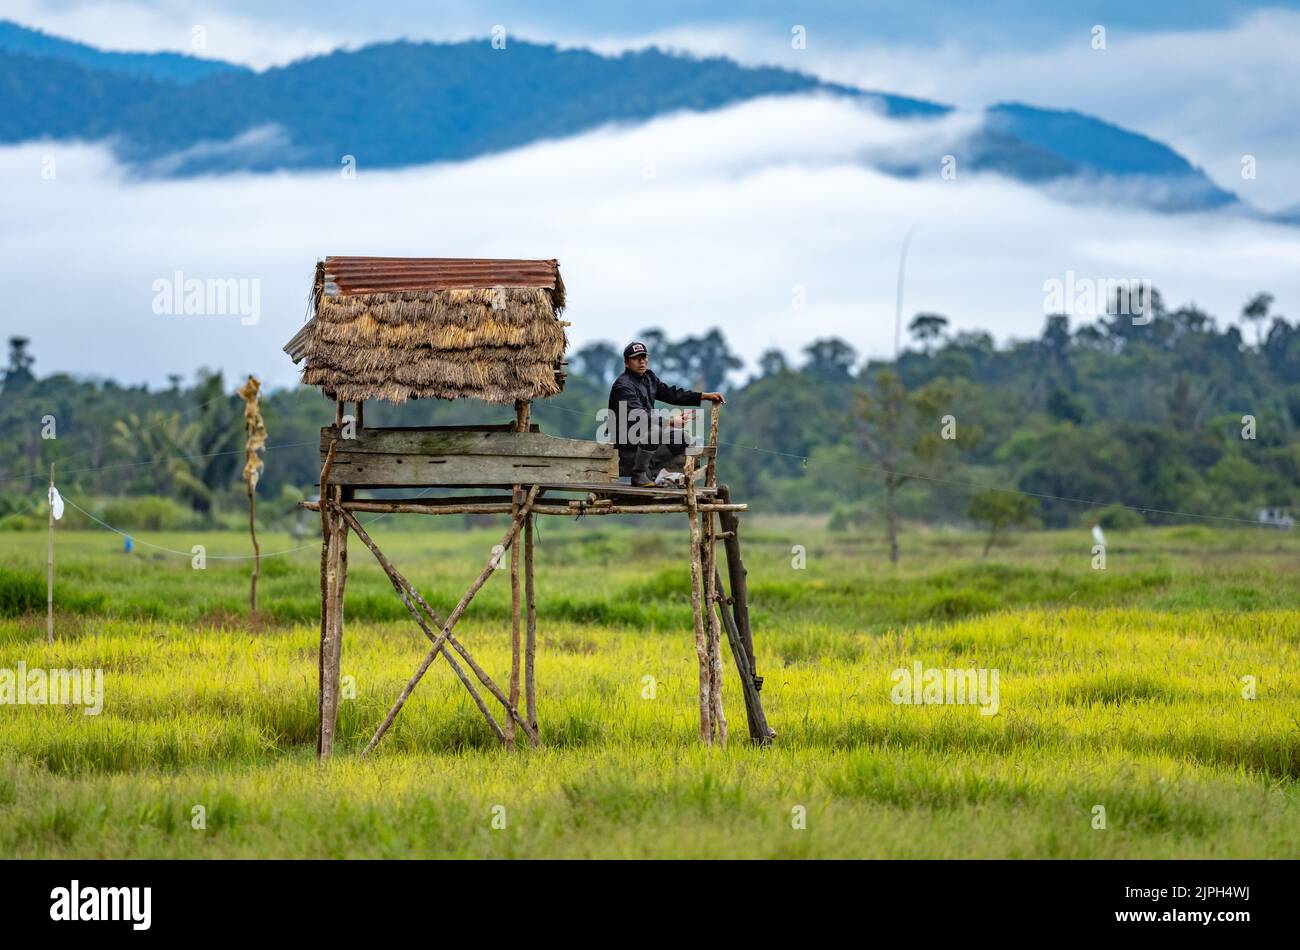 An Indonesia man sitting on a platform, using sling shot to drive away birds in rice field. Sulawesi, Indonesia. Stock Photo